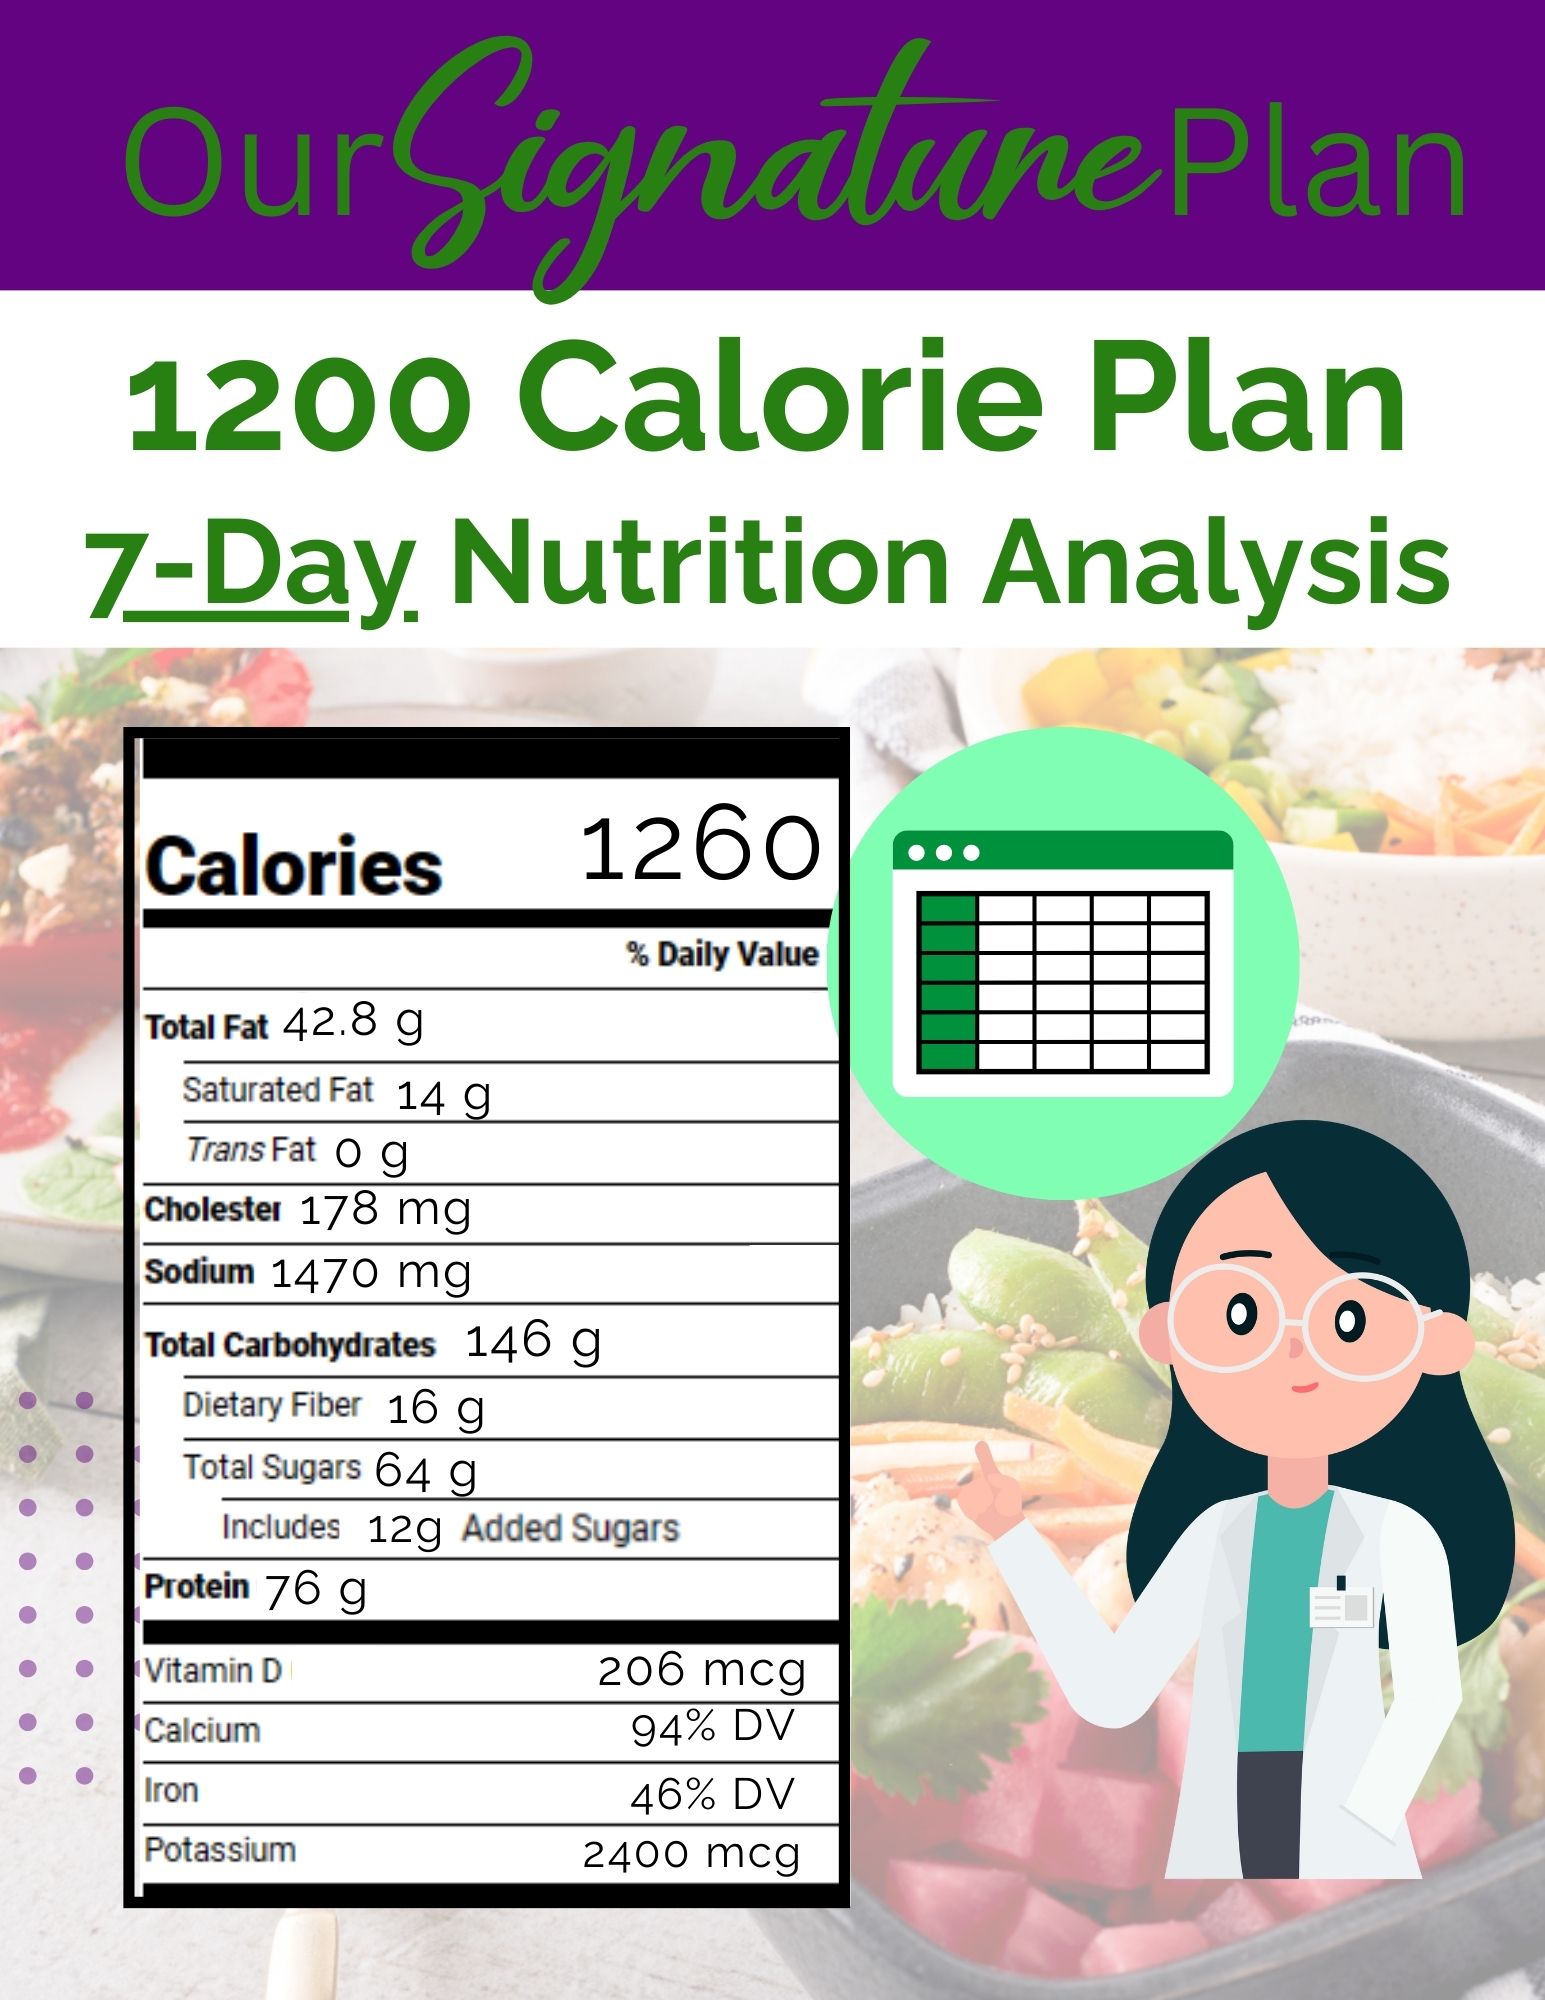 1200 Calorie 7Day Image (1)